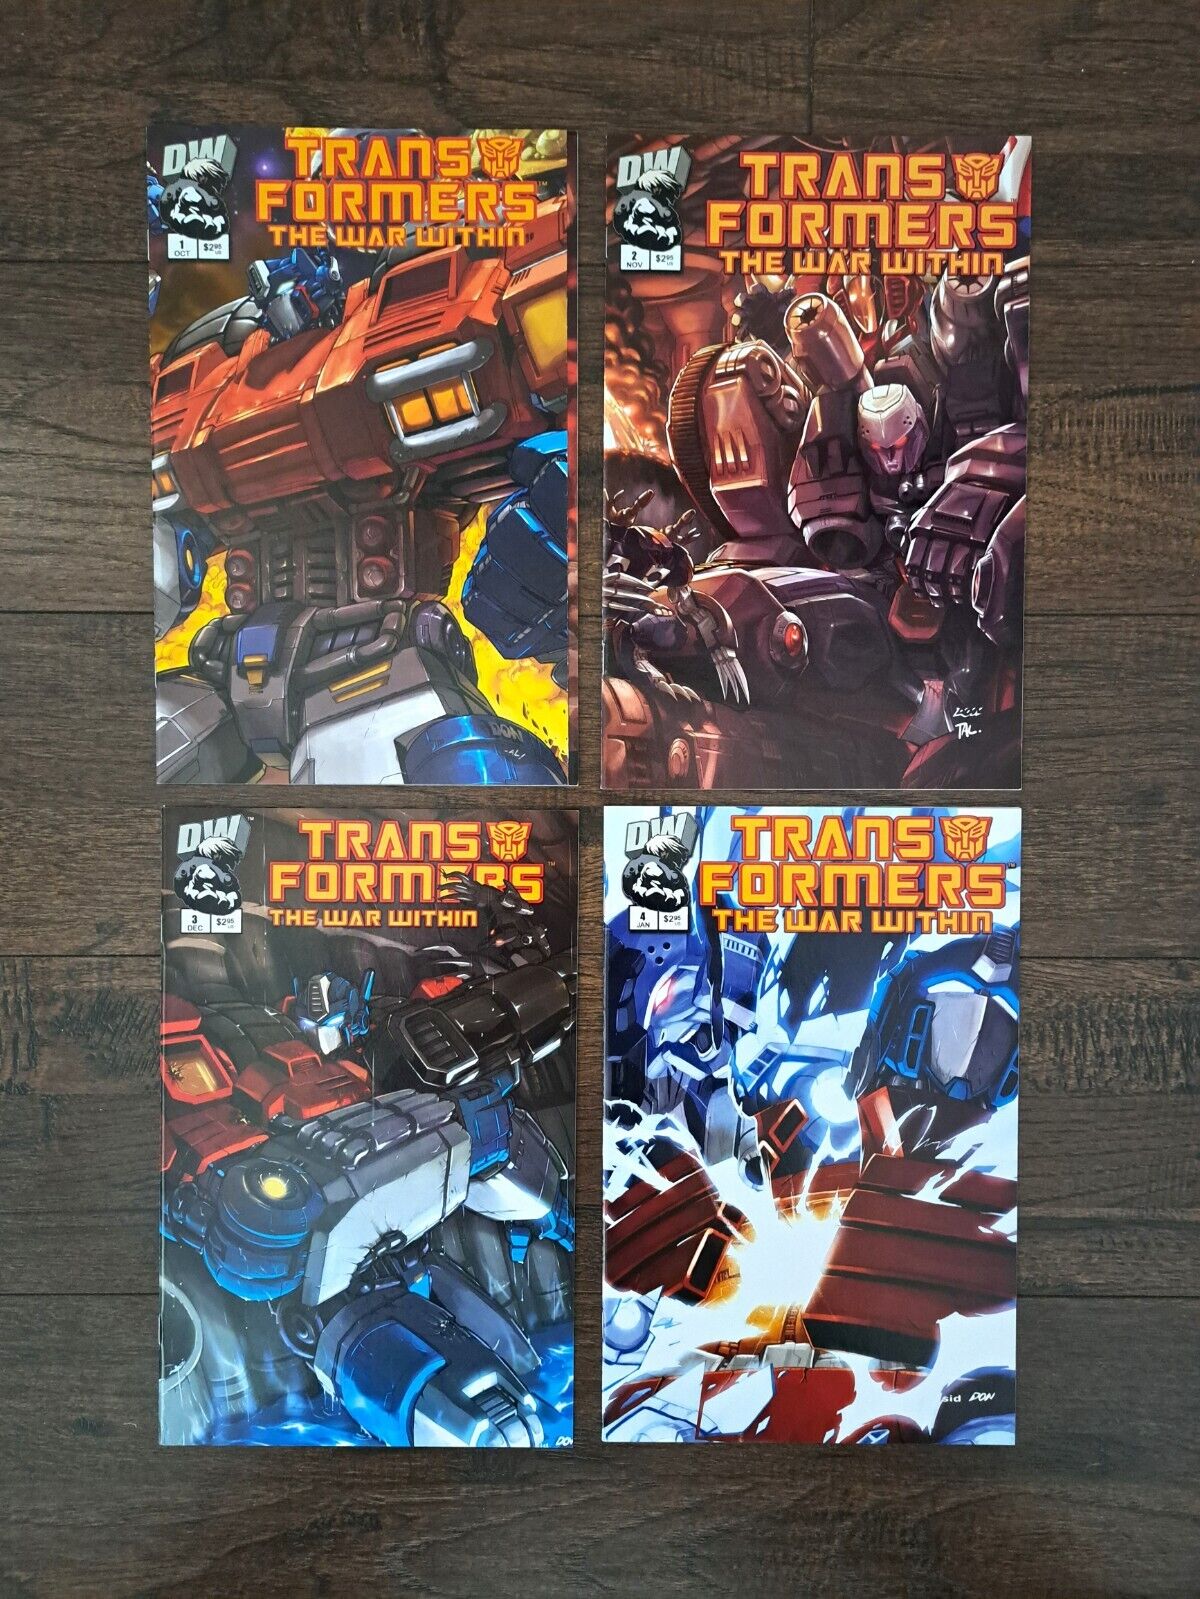 DW Transformers The War Within Comic Book Lot #1, #2, #3, #4 (2002-2003)